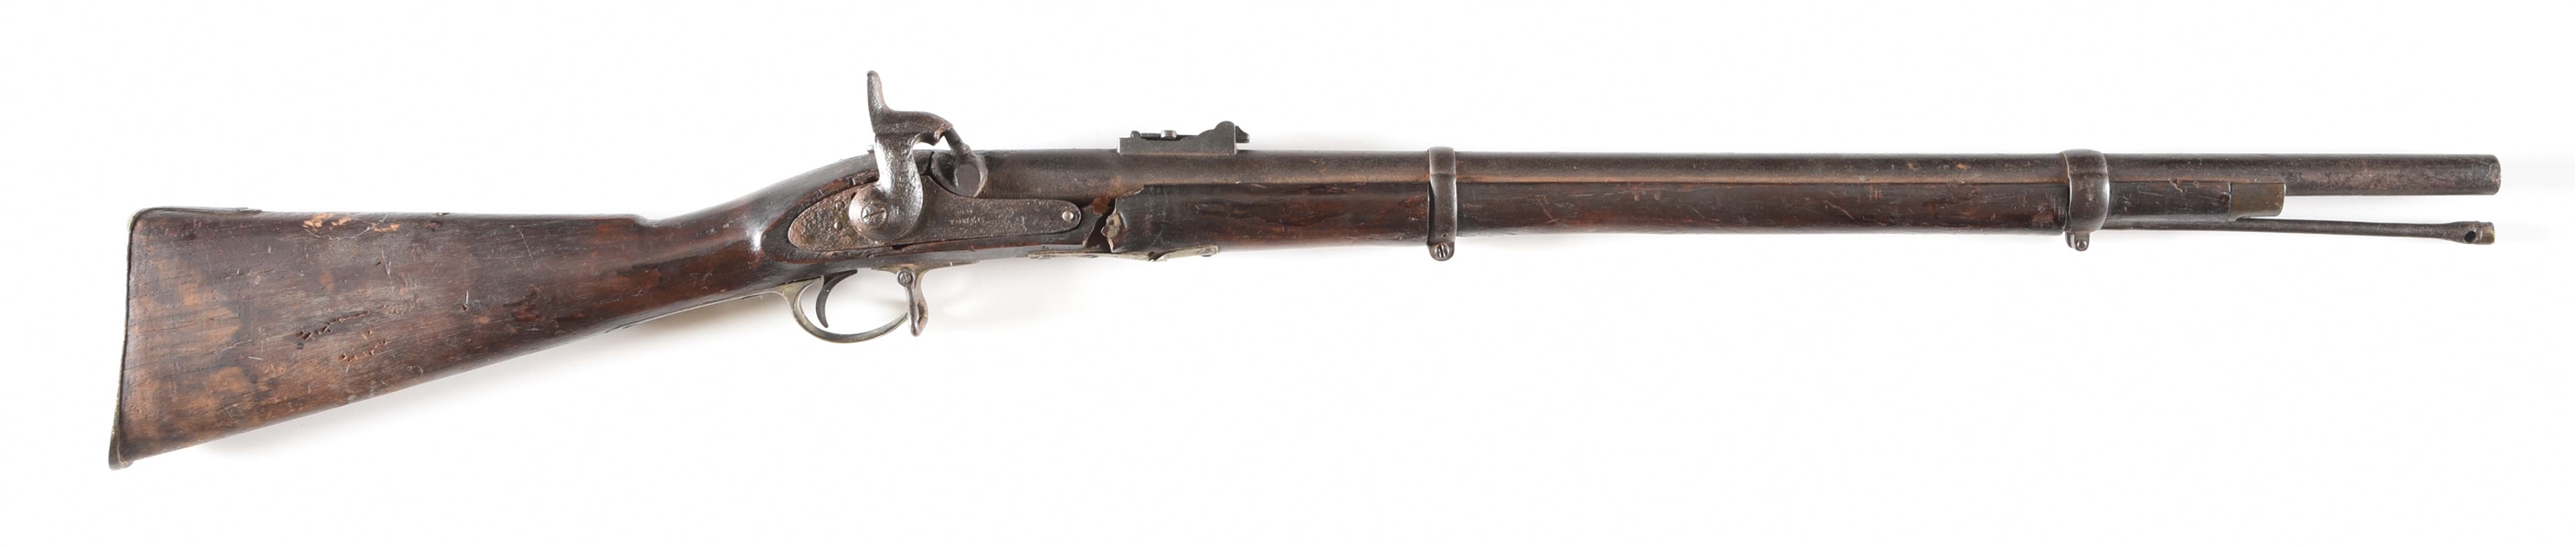 (A) ENFIELD MUSKETOON RELIC PERCUSSION MUSKET